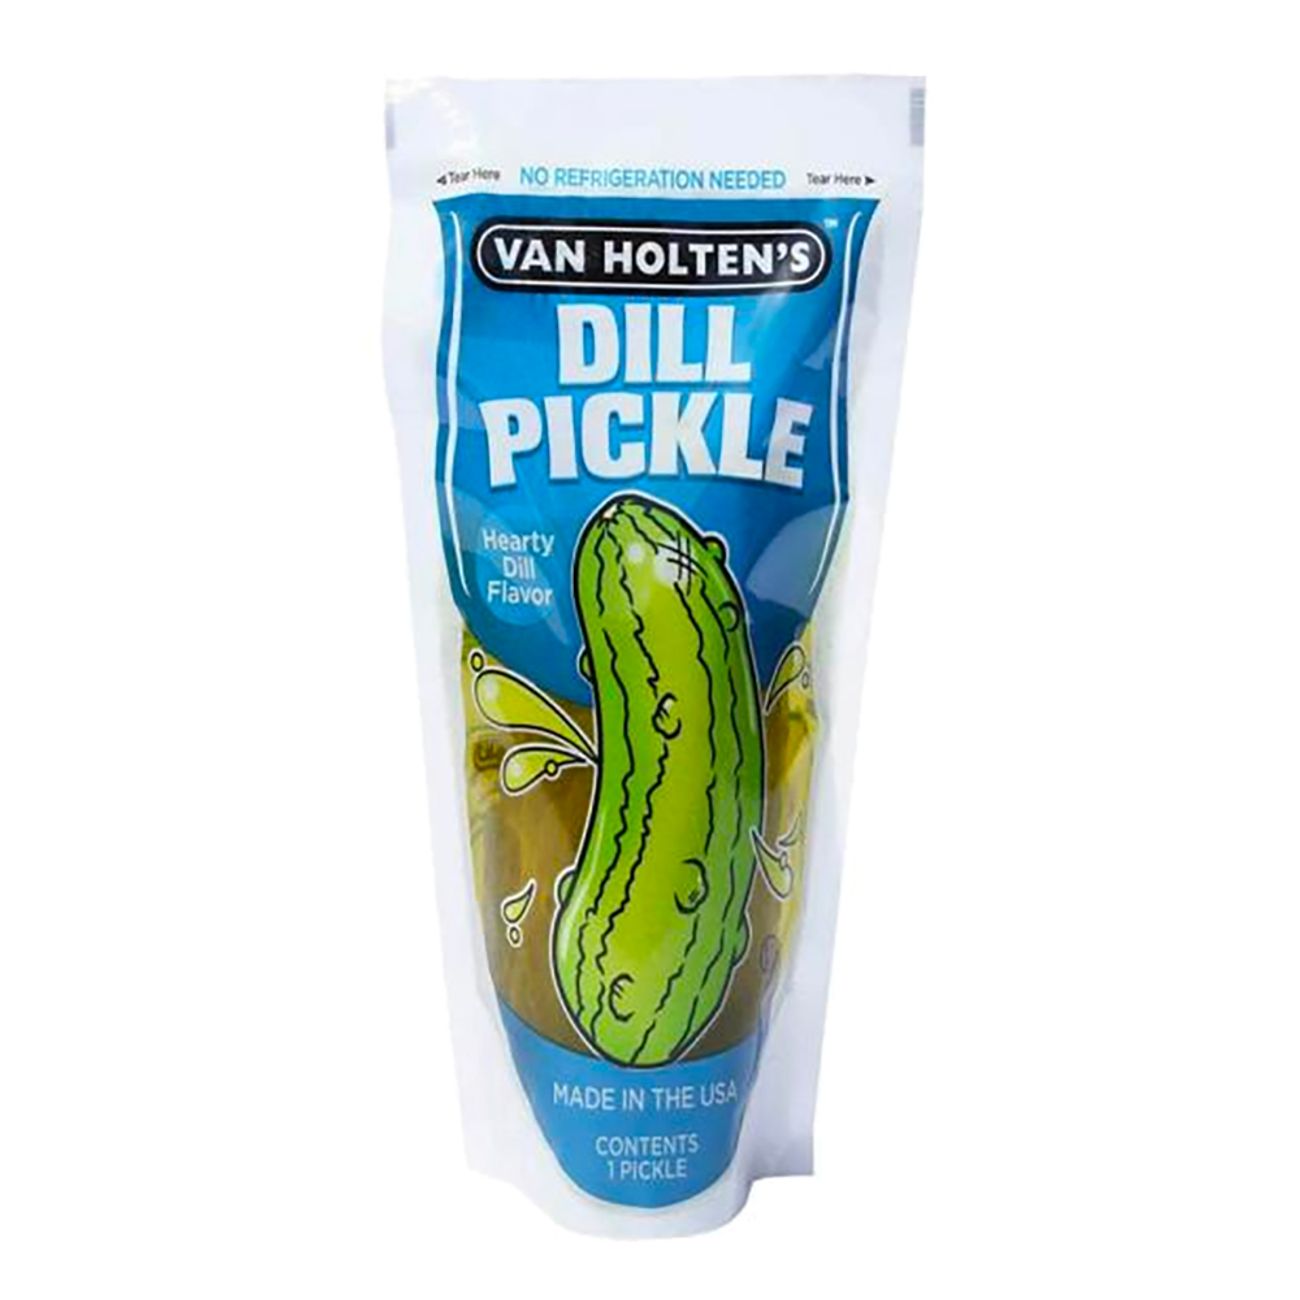 van-holtens-pickles-dill-pickle-92198-1